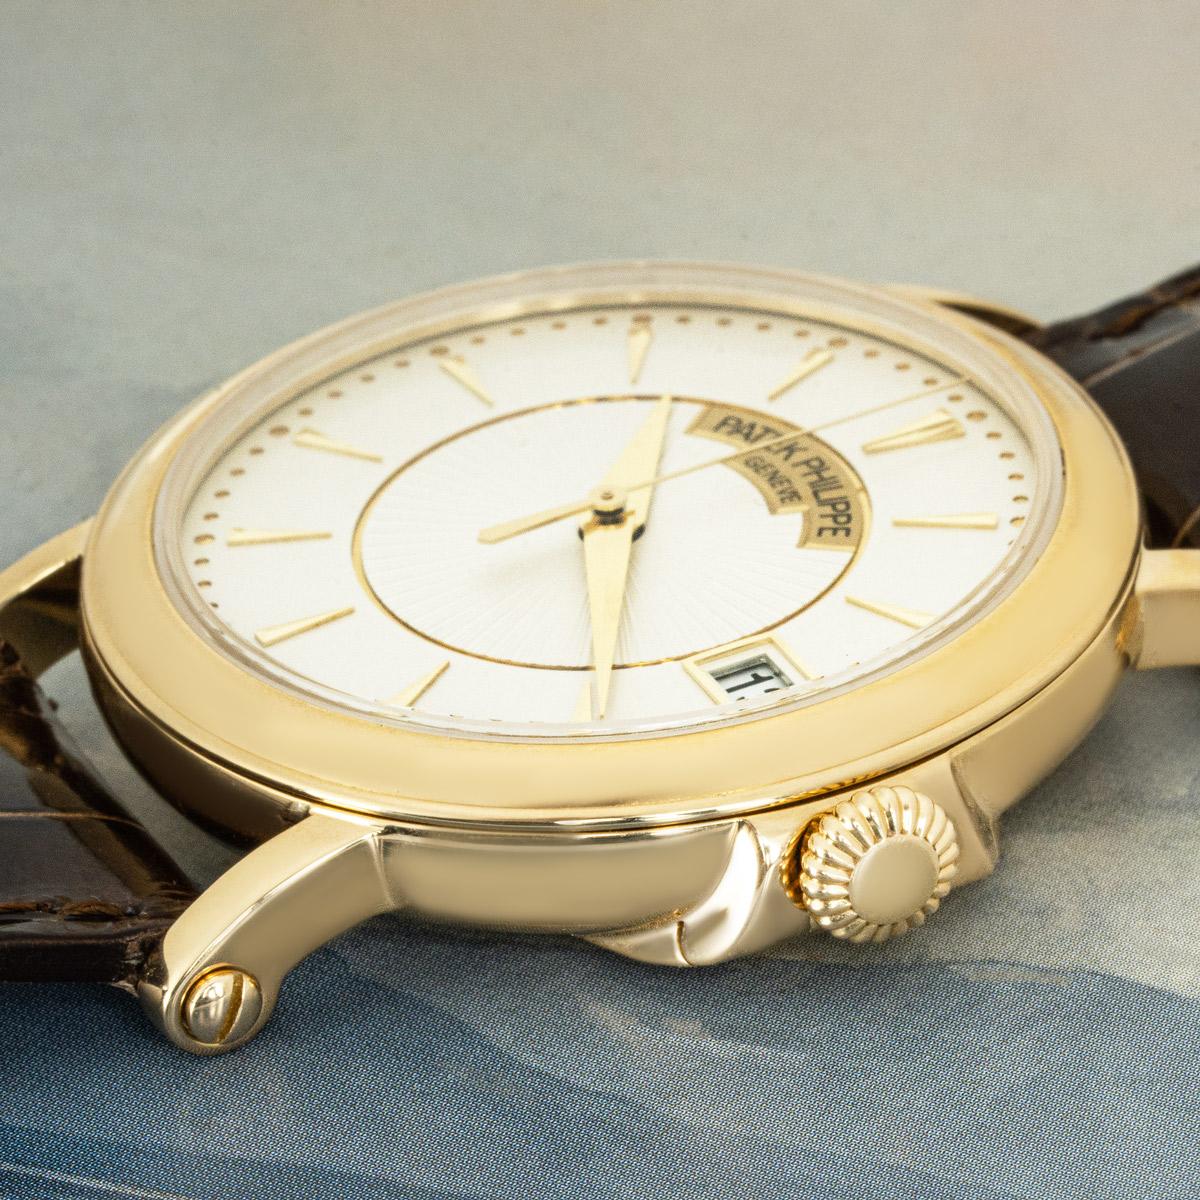 A 38mm Patek Philippe Calatrava crafted in yellow gold. Featuring a silver dial with applied hour markers, a date aperture and yellow gold bezel.

Fitted with a sapphire glass, a self-winding automatic movement and a hinged case back. The watch is